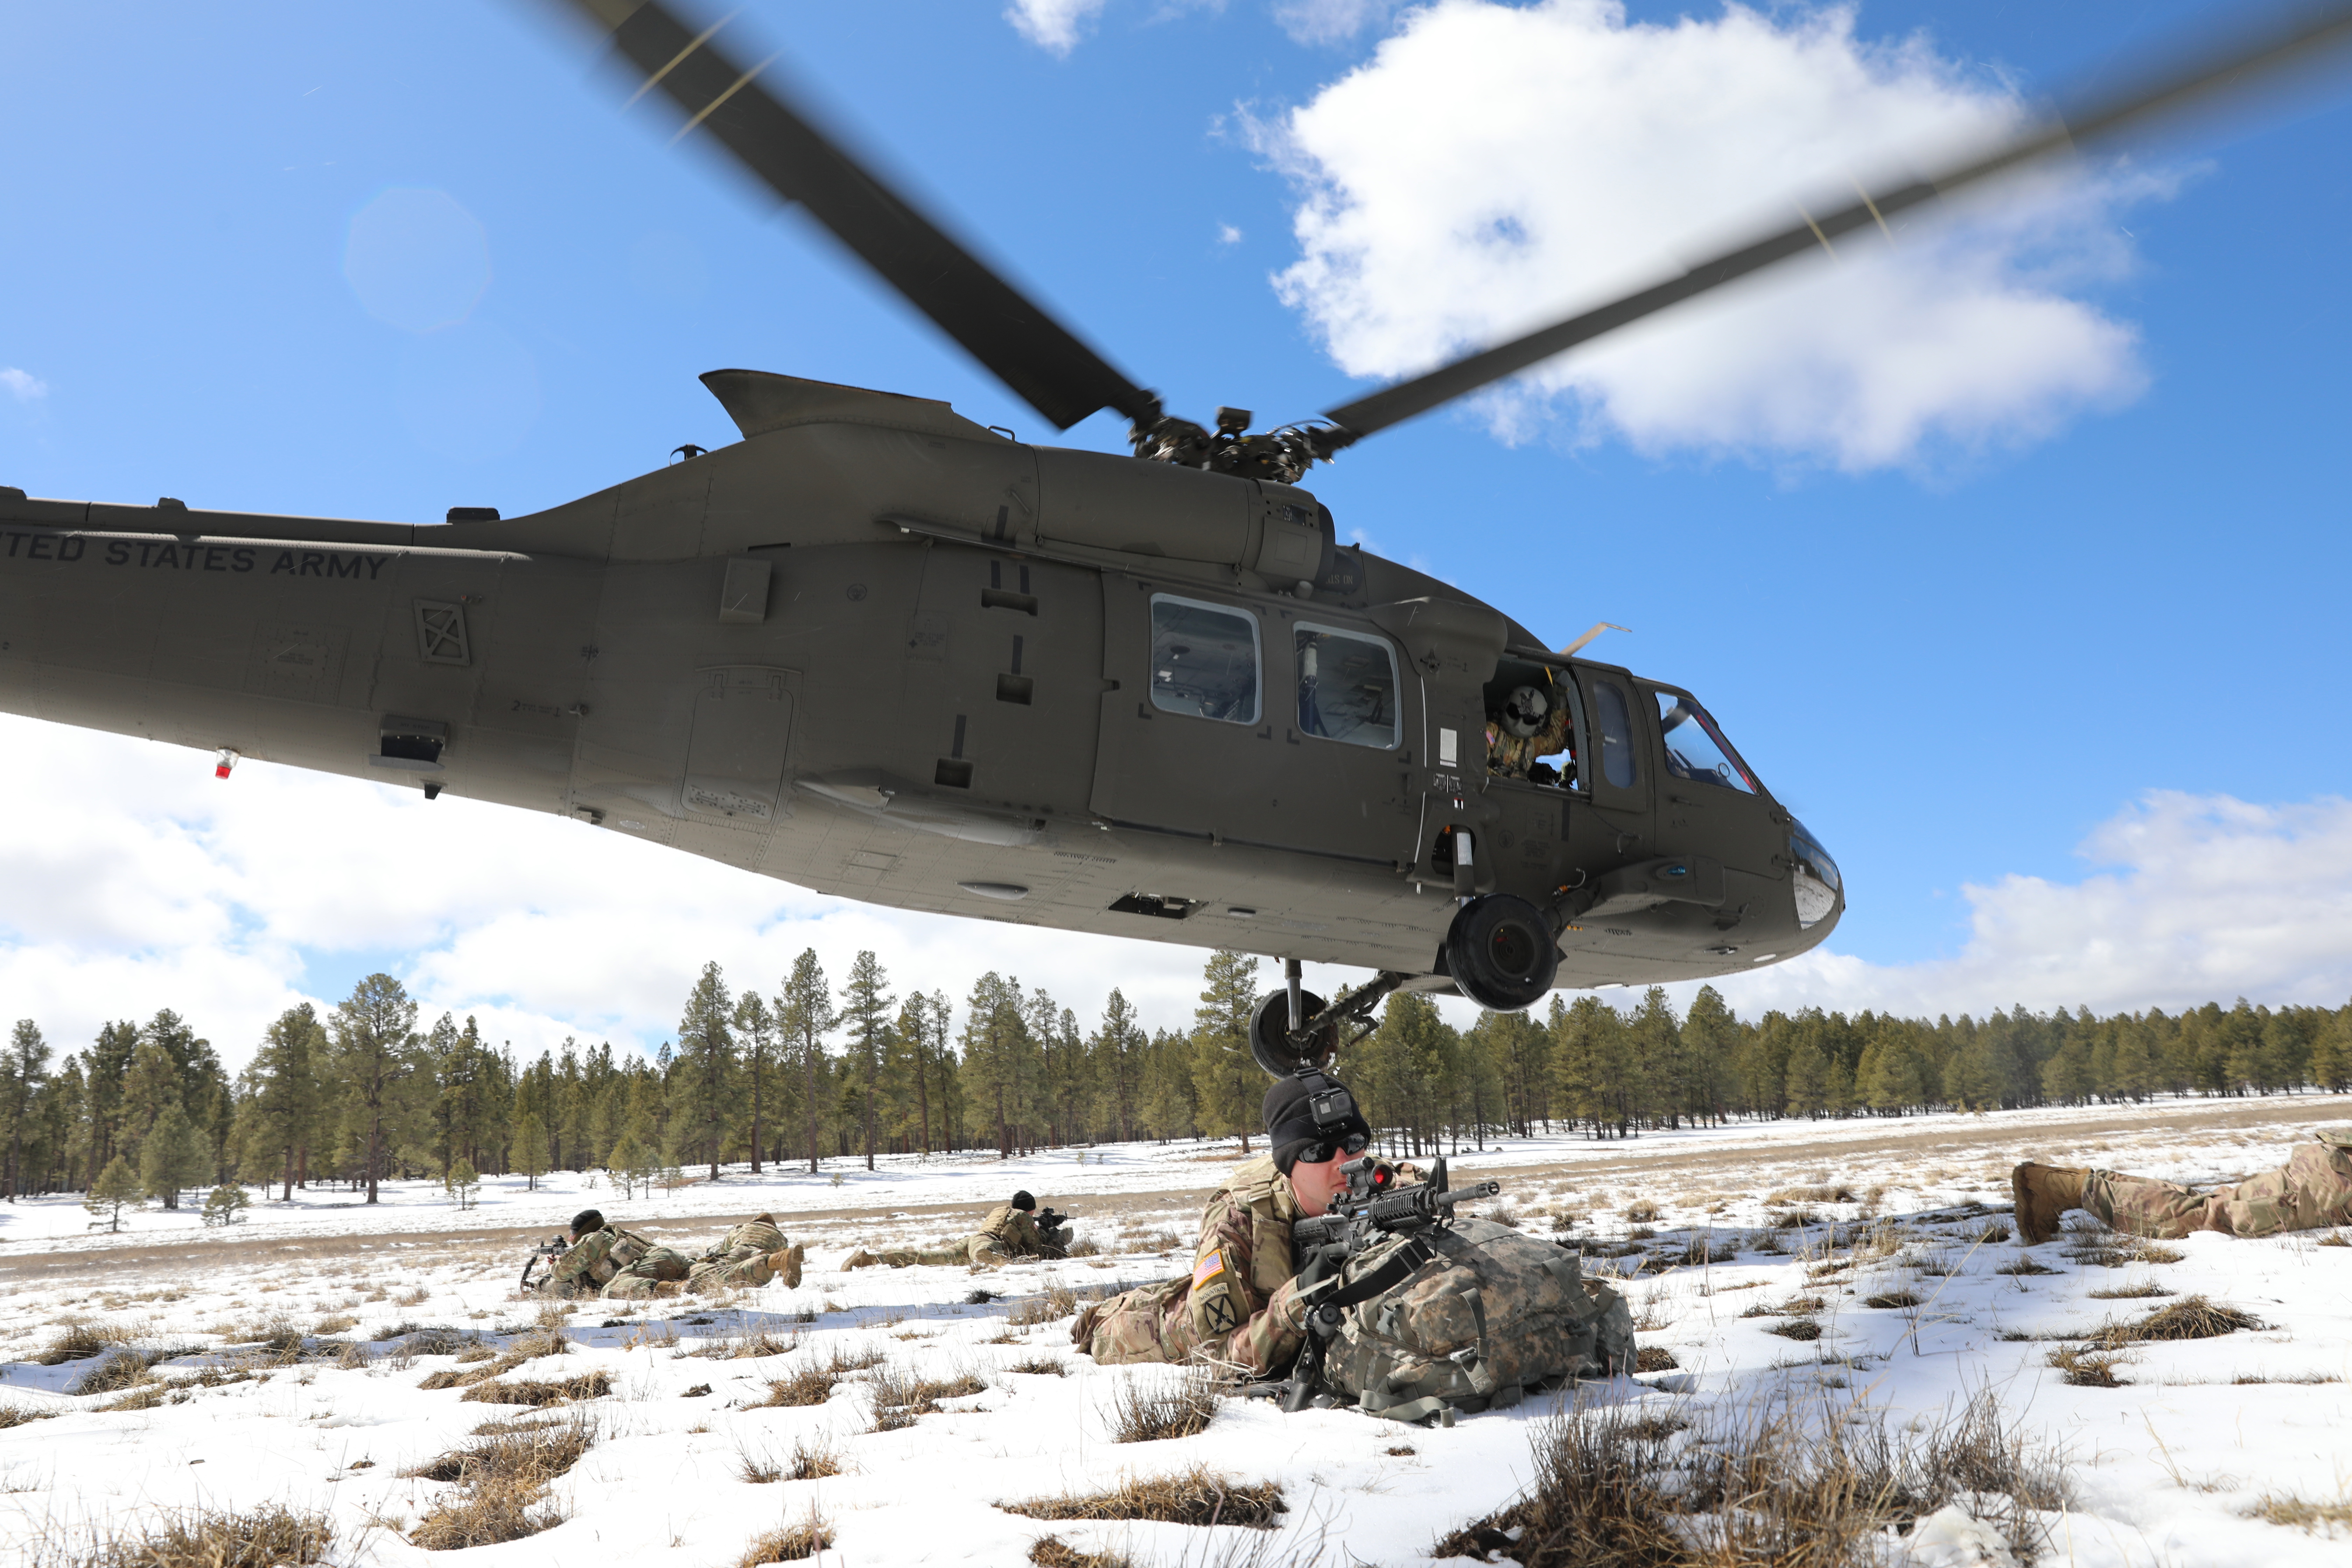 Soldiers pull security, as a UH-60 Blackhawk helicopter lifts off after completing an air assault drop at Camp Navajo.